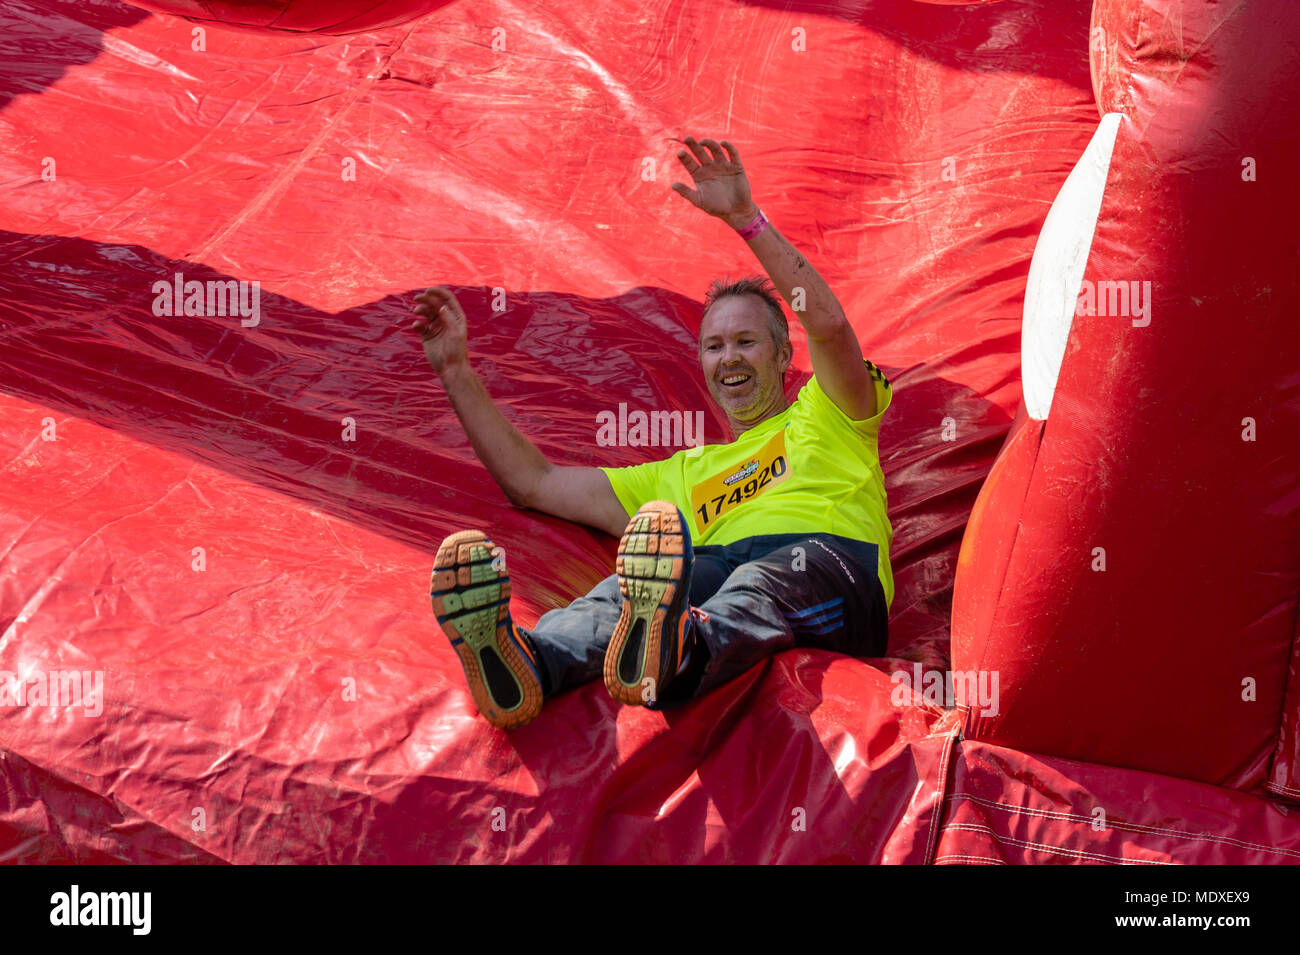 Essex, UK. 21st April, 2018. Spring fun in the sun, the Gung-Ho 5k obstacle Course event with several thousand participants who cover a five kilometre fun run over giant inflatable obstacles with finale is Europe’s biggest ever inflatable slide held its first event of the year at Weald Country Park, Brentwood, Essex, UK. Credit: Ian Davidson/Alamy Live News Stock Photo